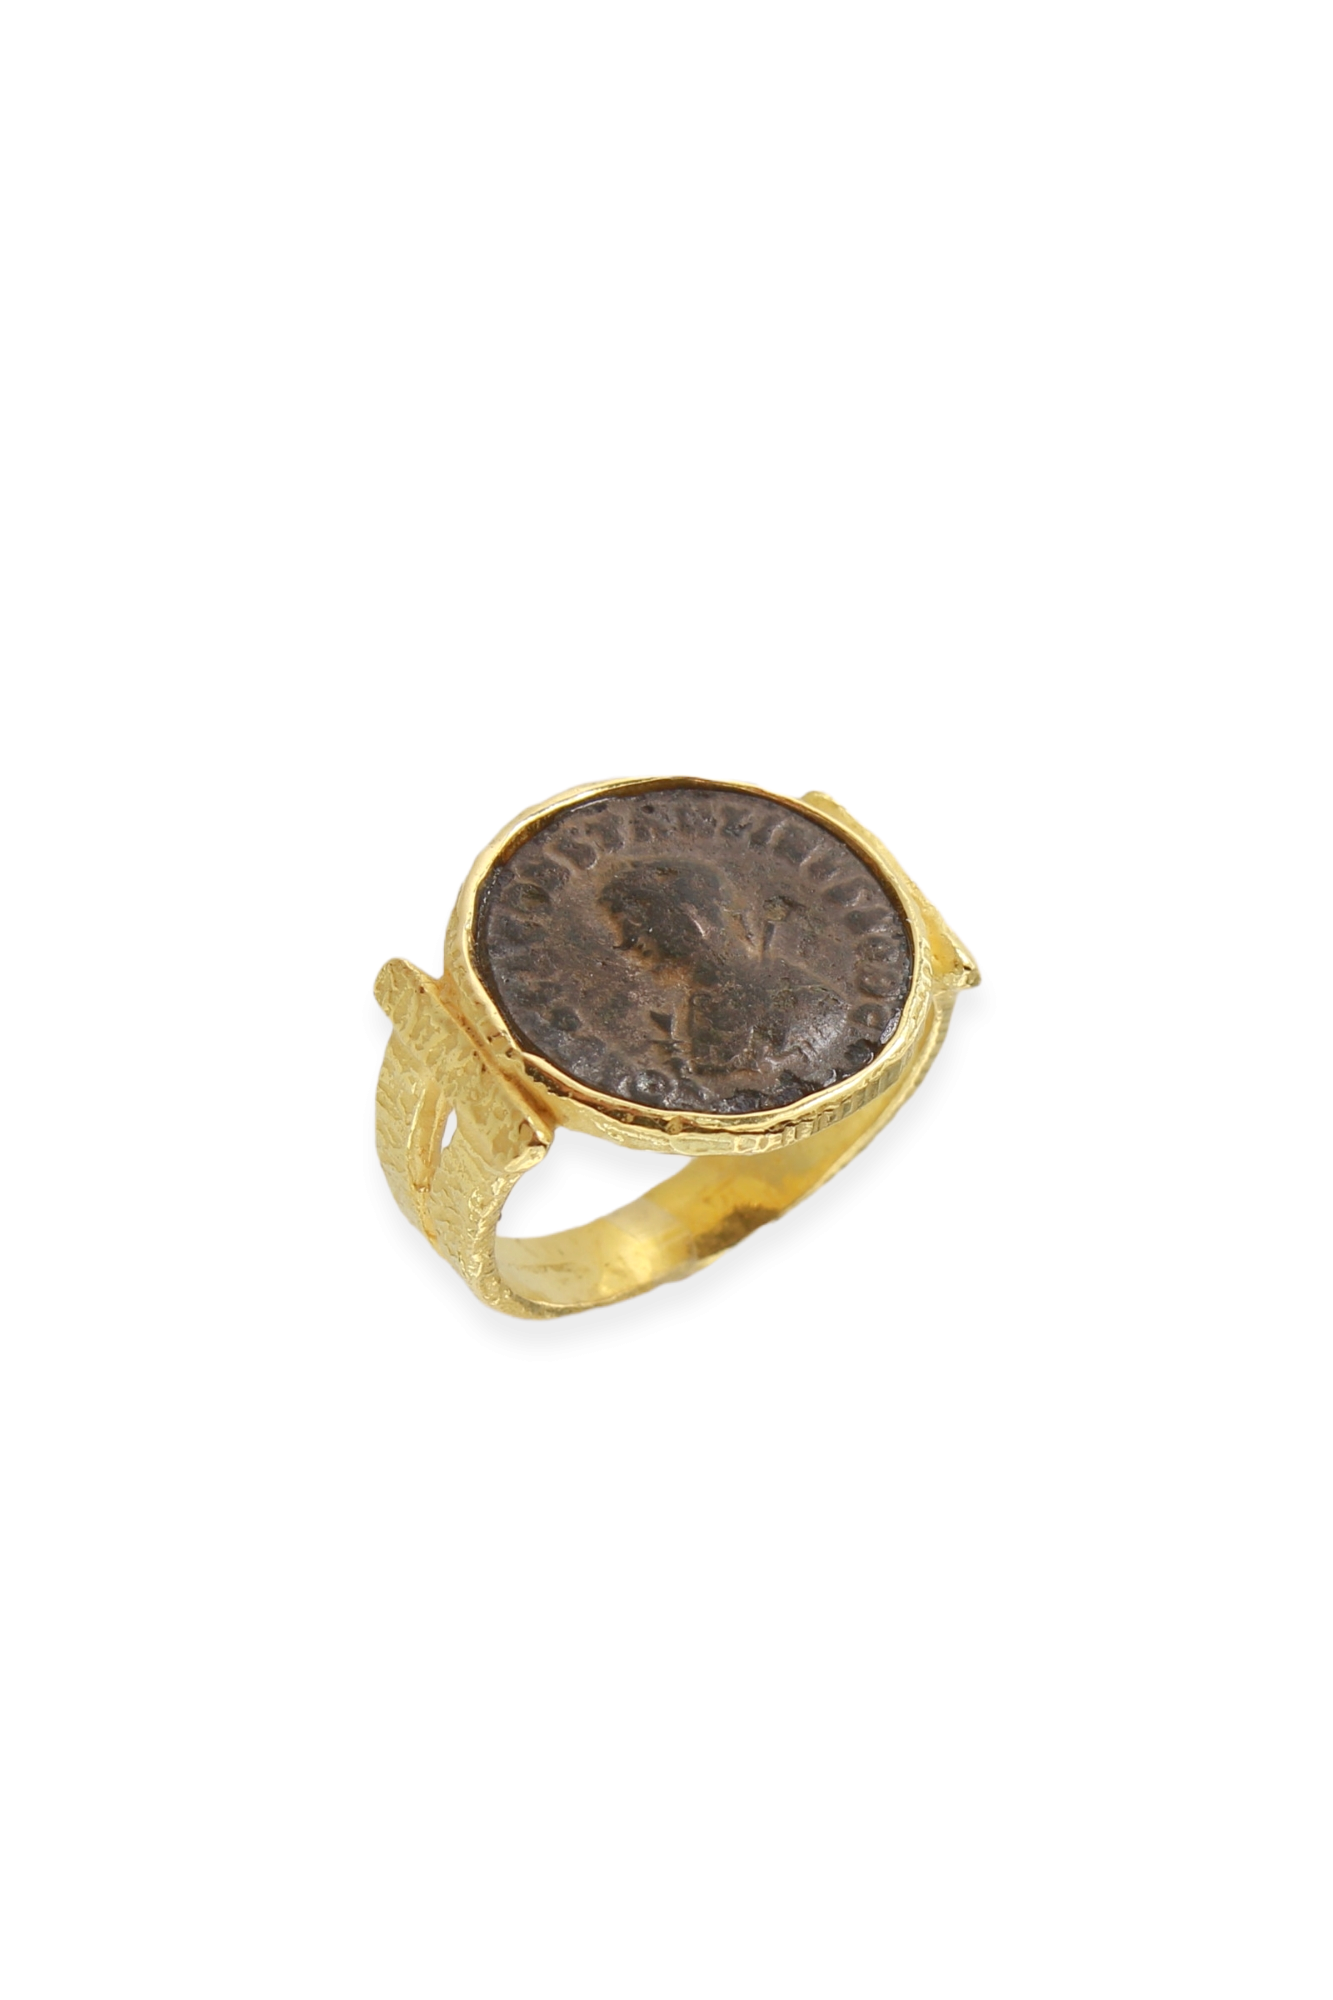 SE679B-18-Kt-Yellow-Gold-Ring-with-Roman-Coin-1